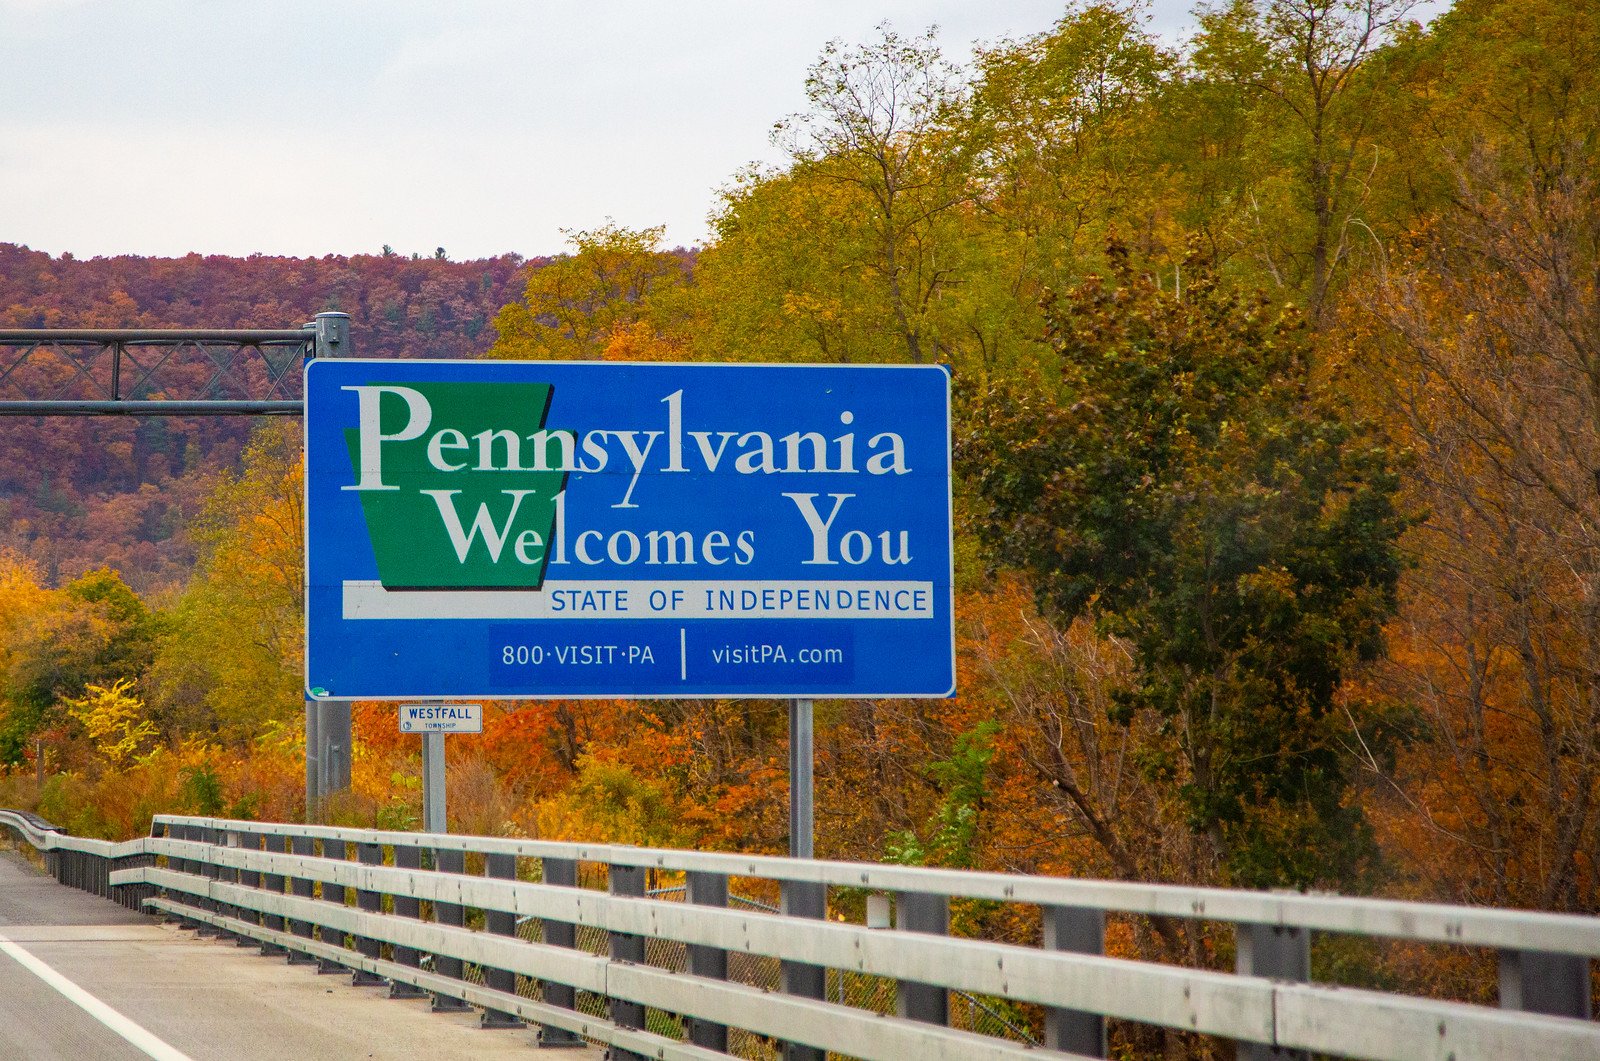 Pennsylvania state sign along the highway that reads 